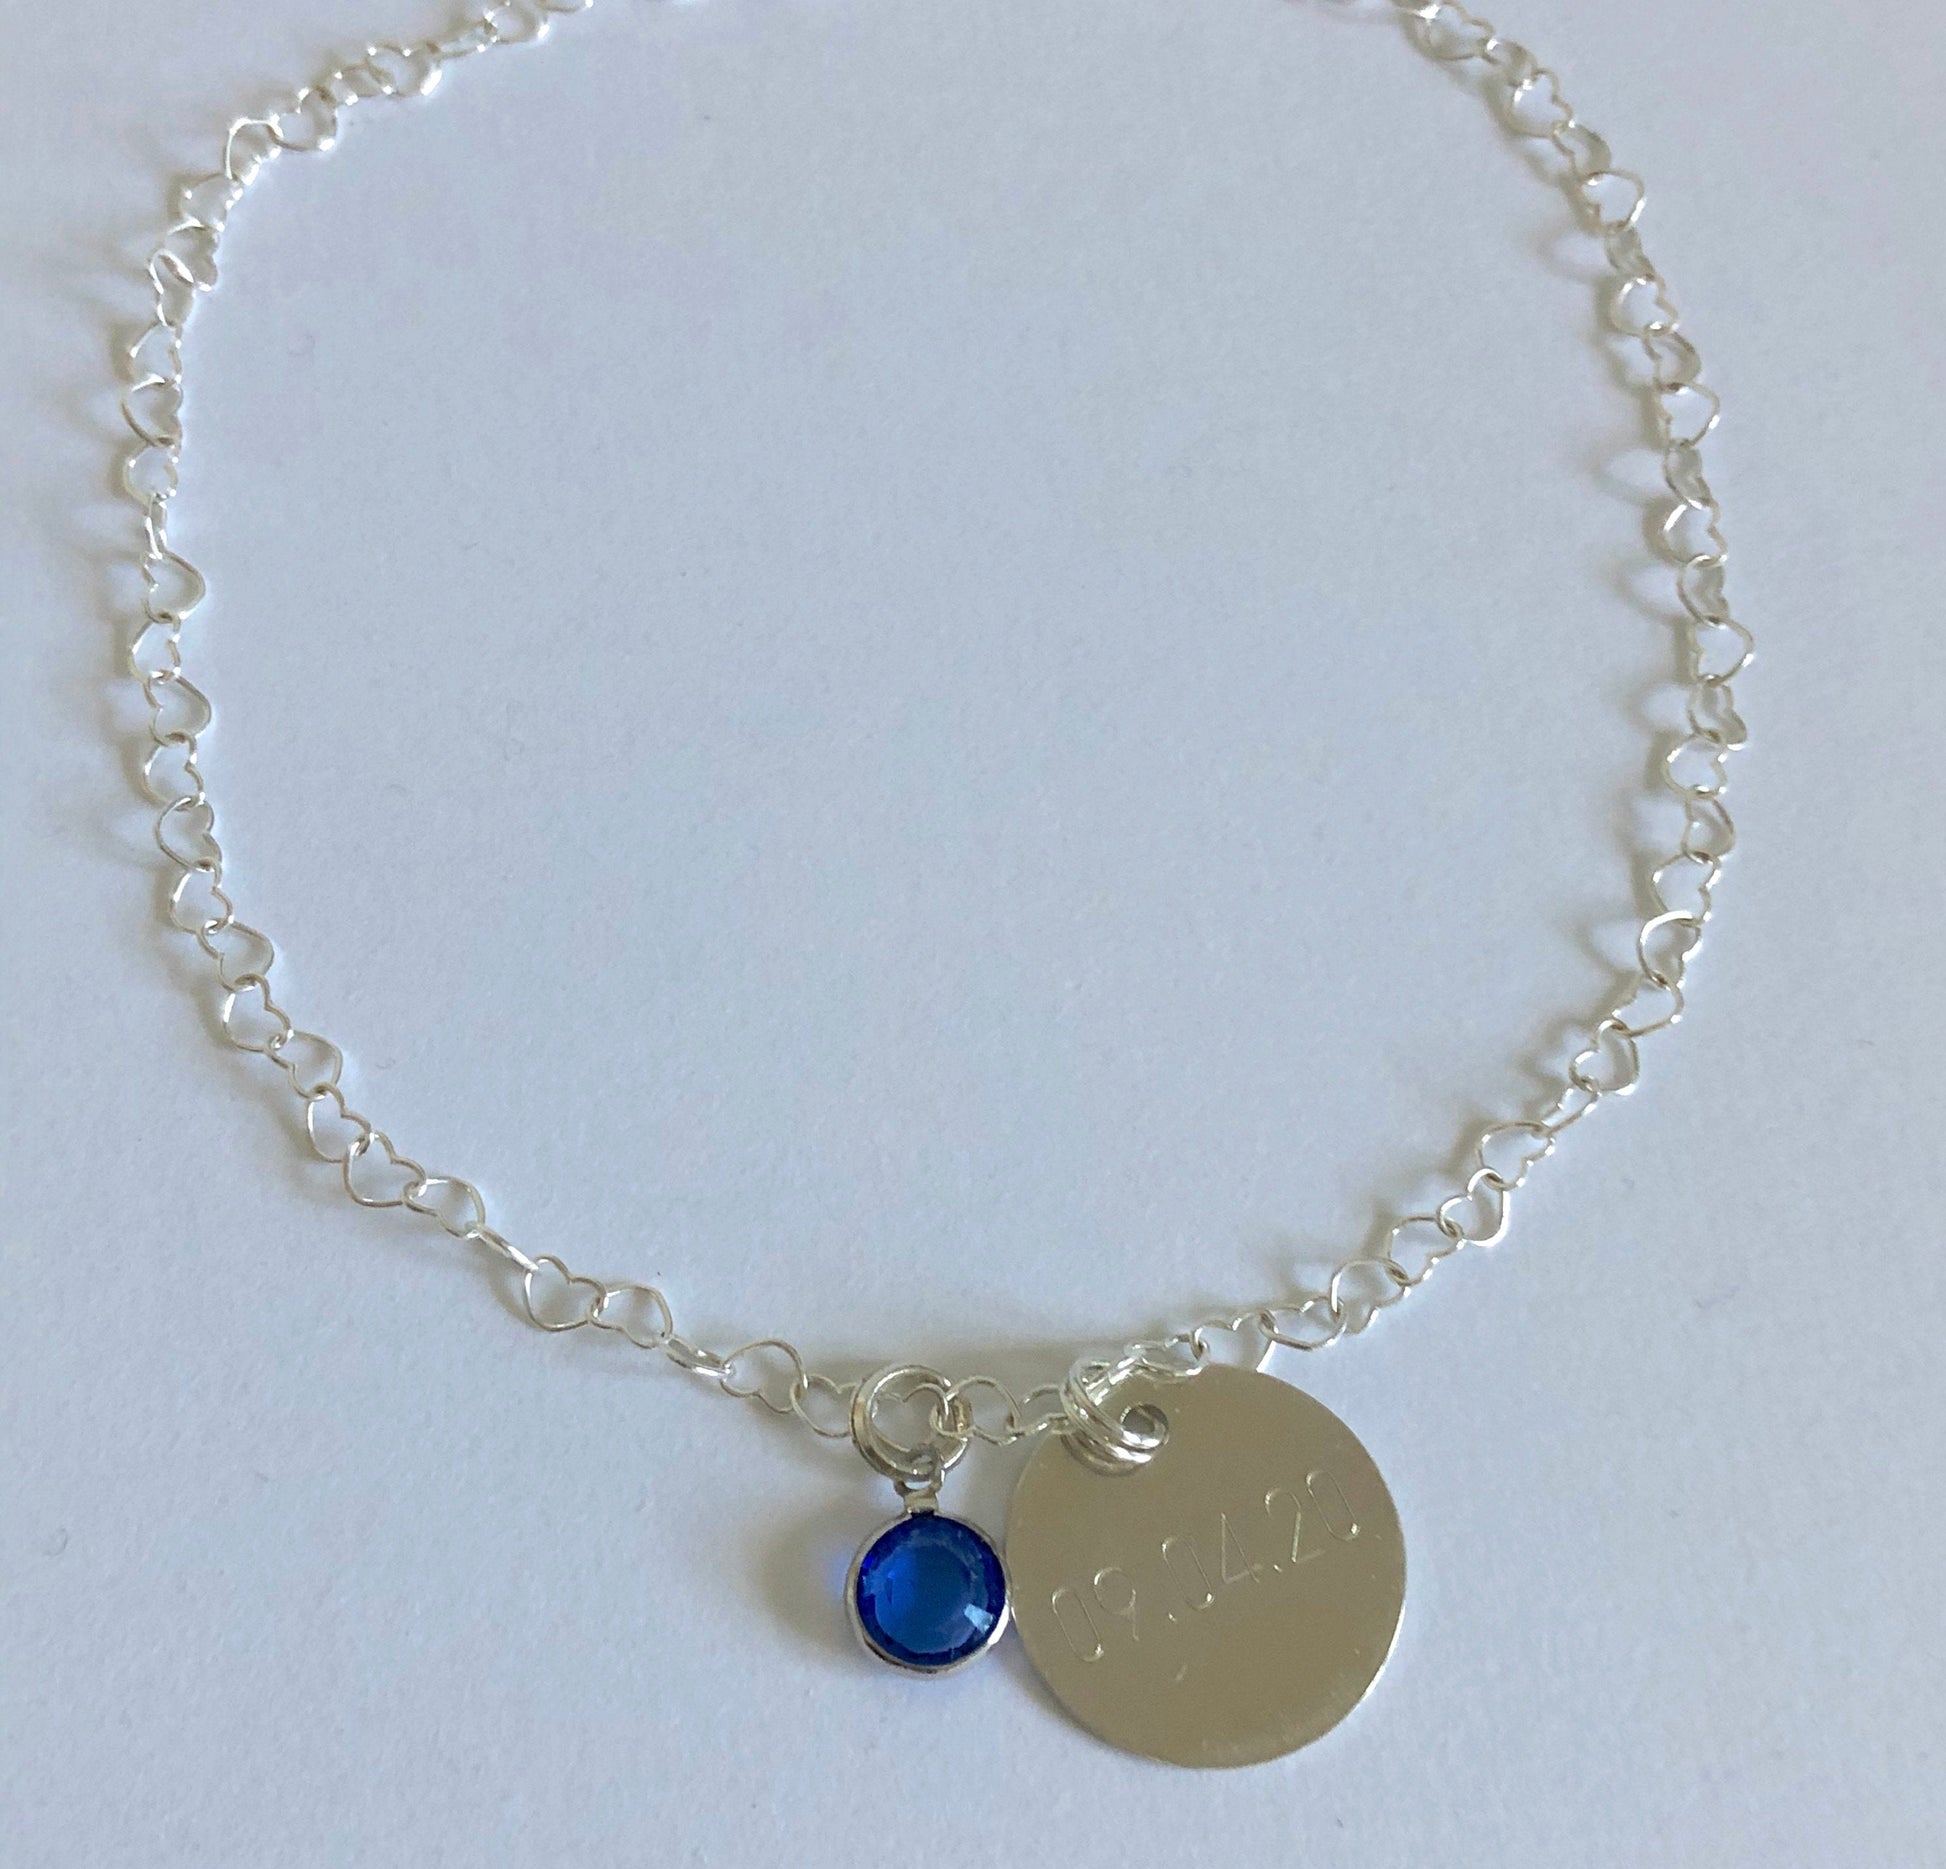 anklet with heart shaped links, blue stone and tag showing wedding date